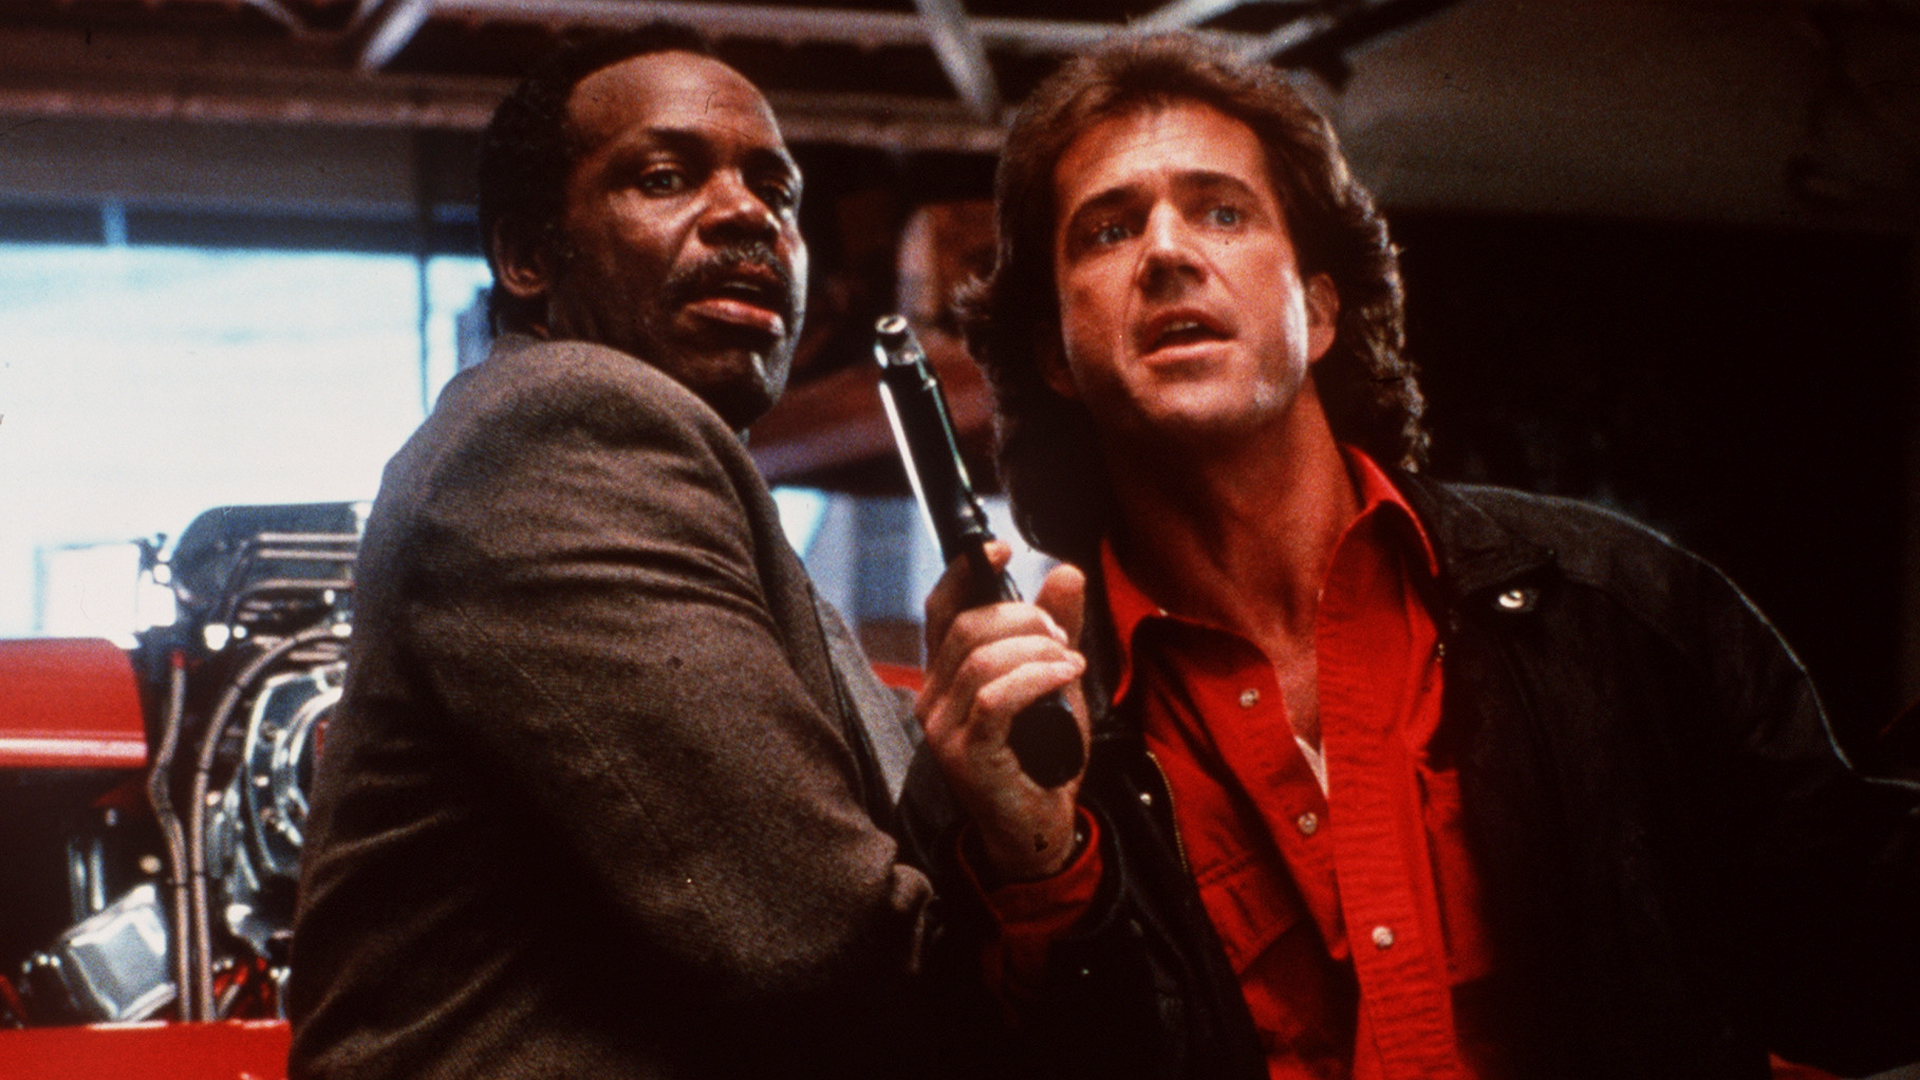 Is LETHAL WEAPON 5 Coming? Maybe, Says Exec Producer of TV Reboot ...